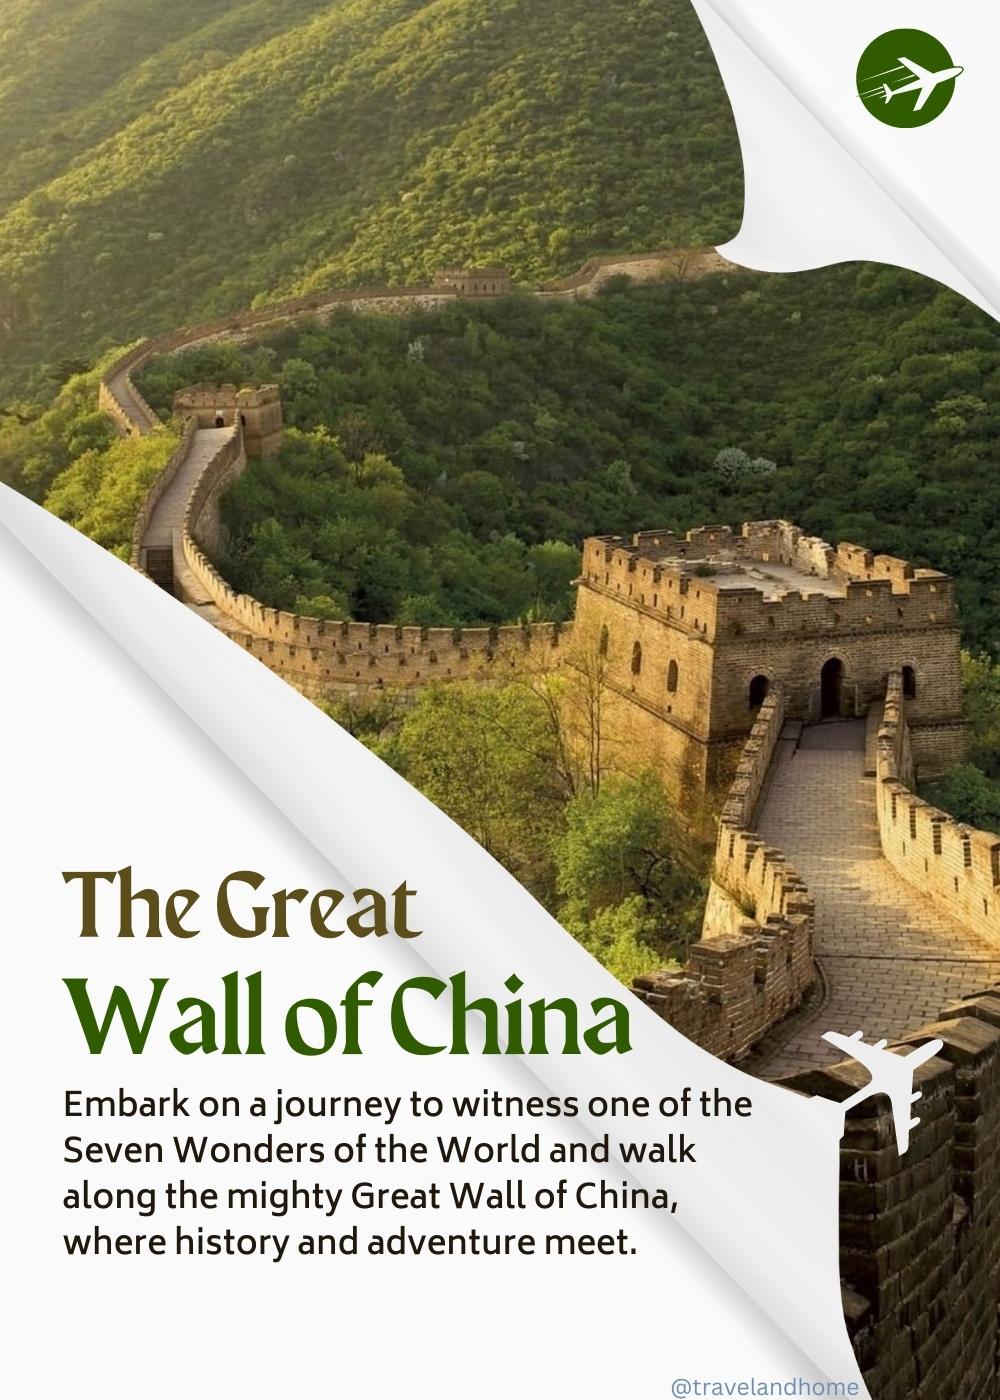 Must visit Great Wall of China hiking adventure history architecture best cityscapes travel and home